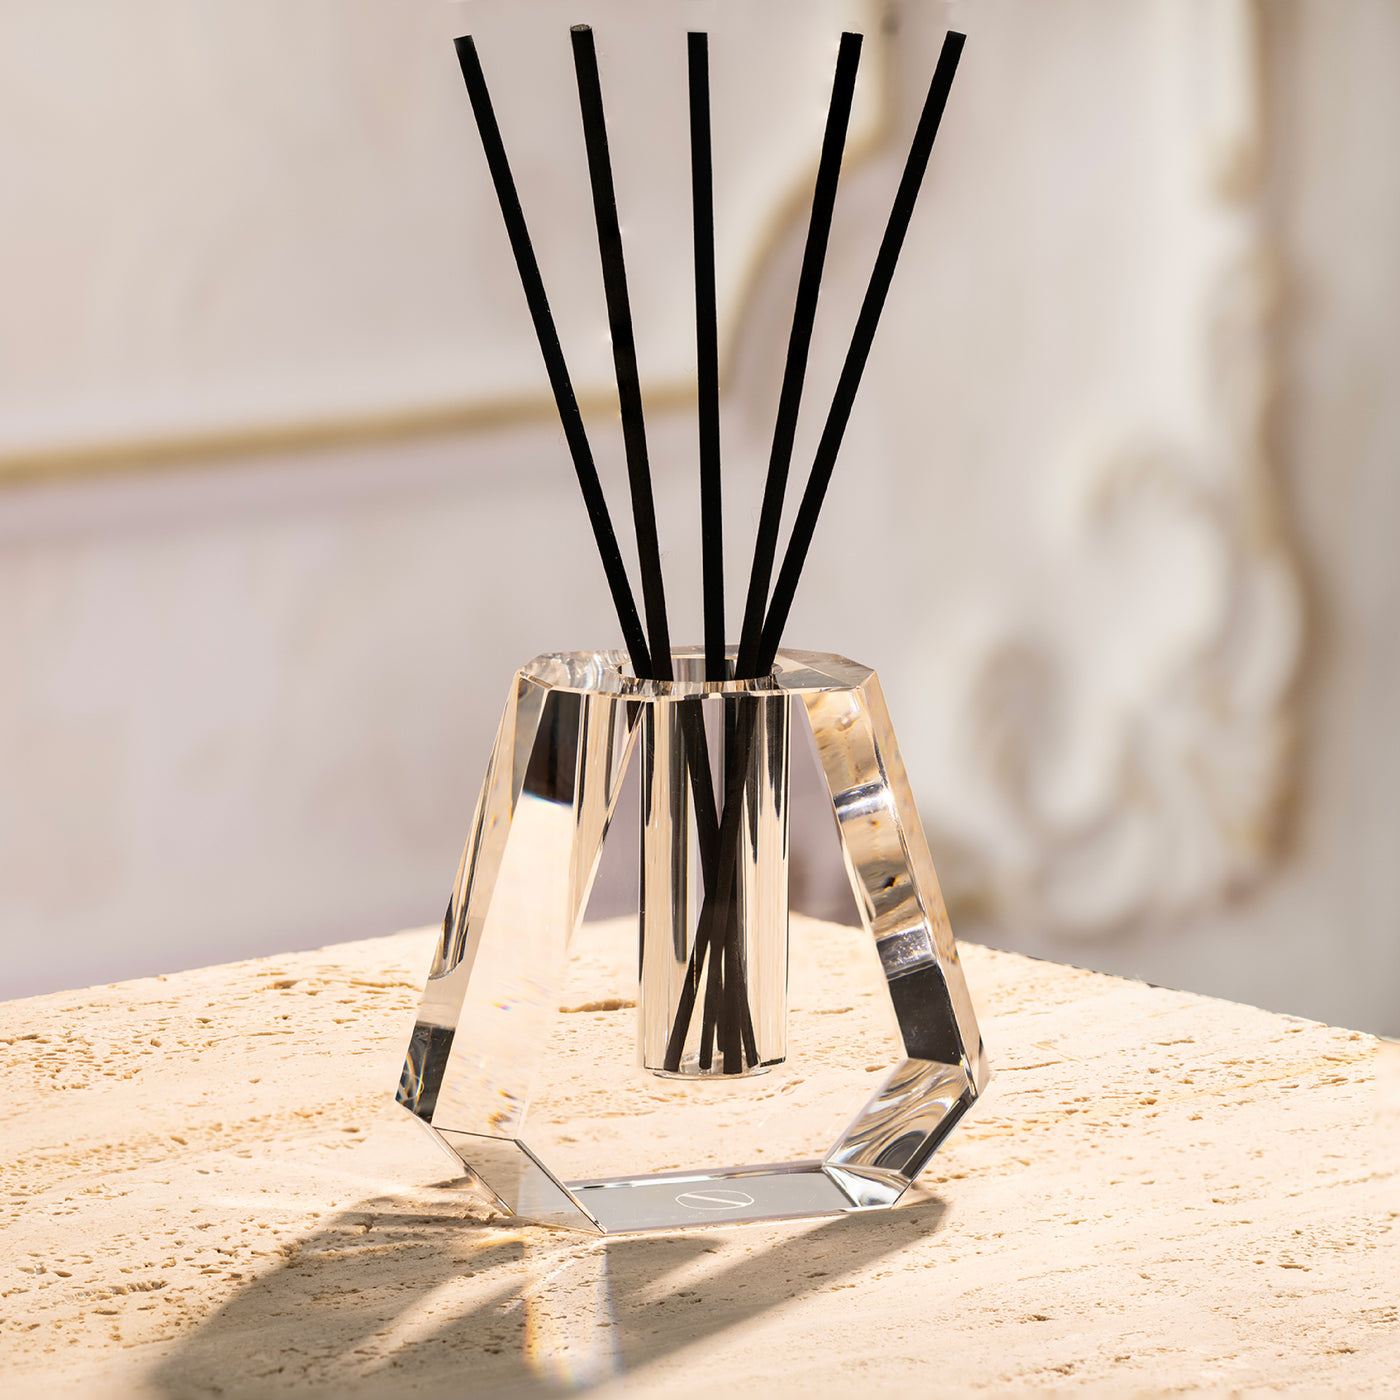 Crystallo Prism Reed Diffuser